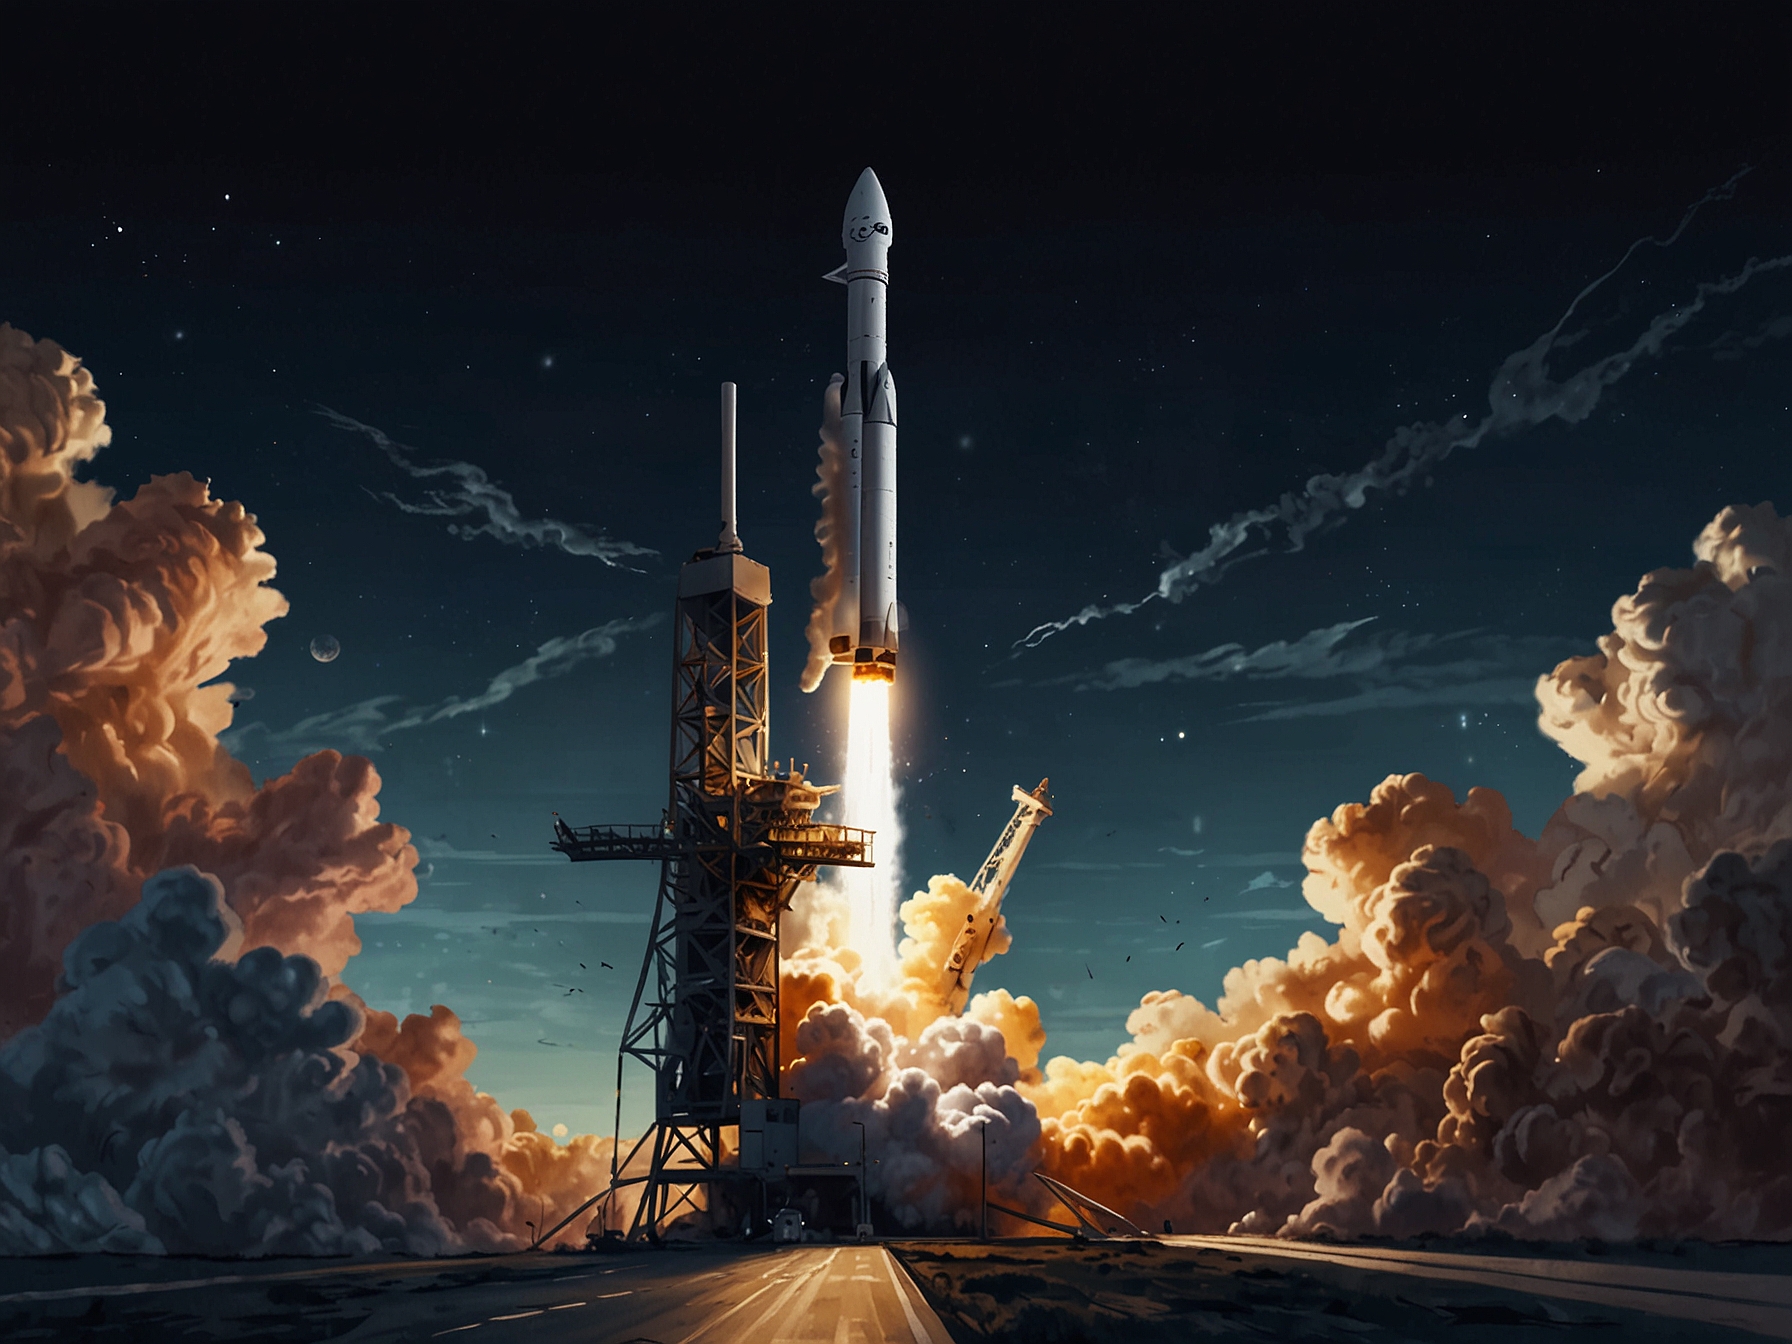 Illustration depicting a SpaceX Falcon rocket launch, symbolizing the collaborative efforts between private companies and government agencies in advancing space exploration.